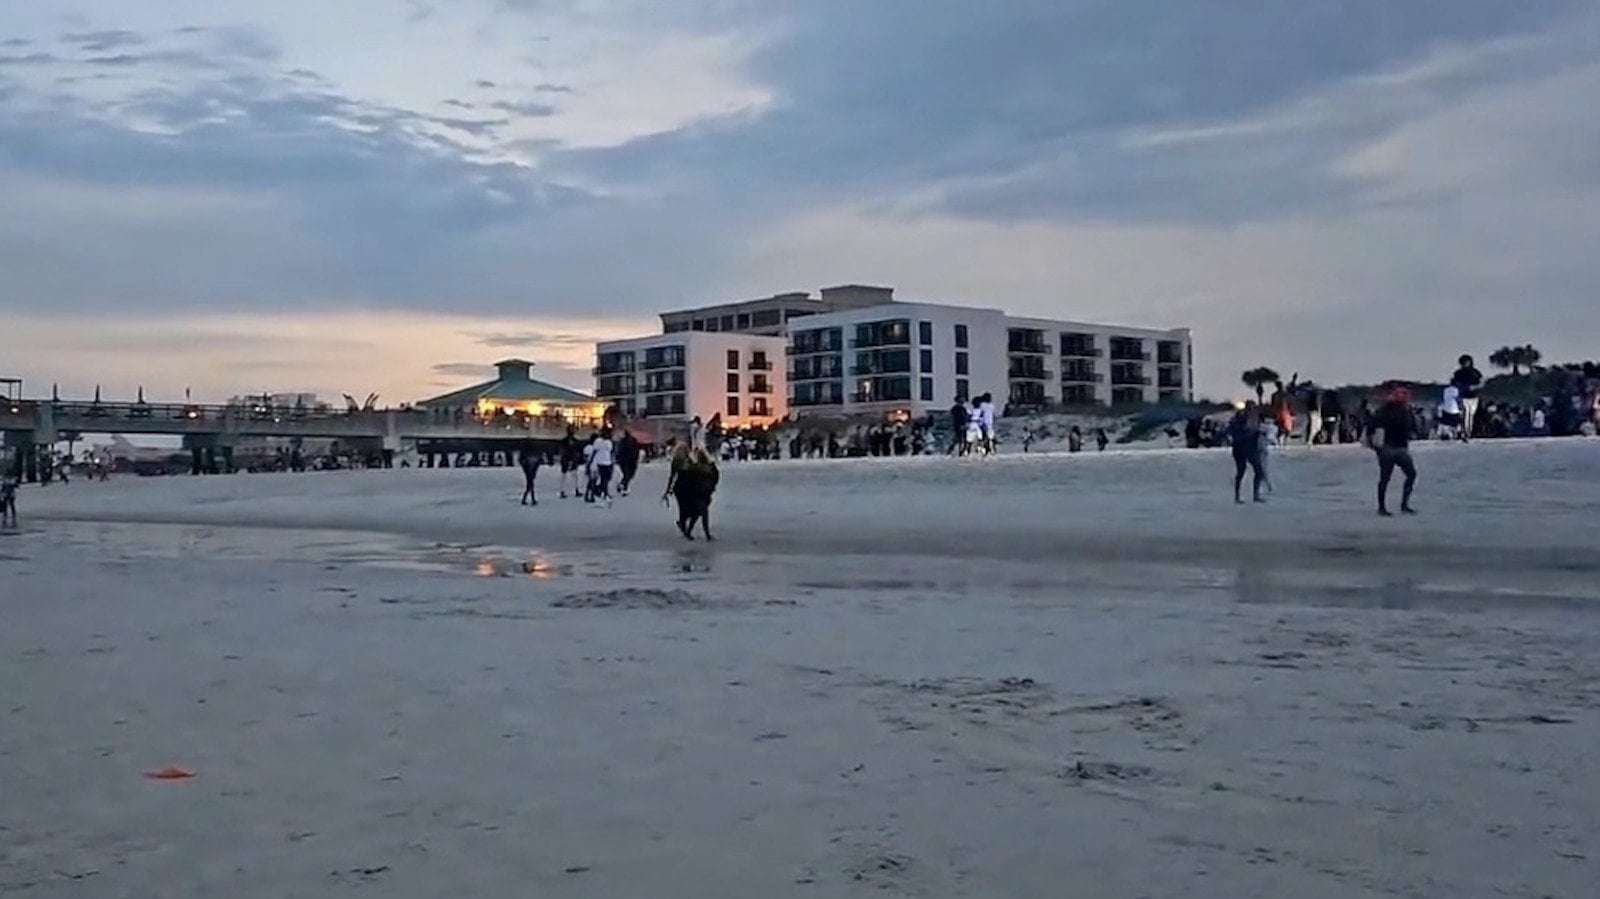 image for 3 separate shootings erupt within 1 hour in Jacksonville Beach, Florida